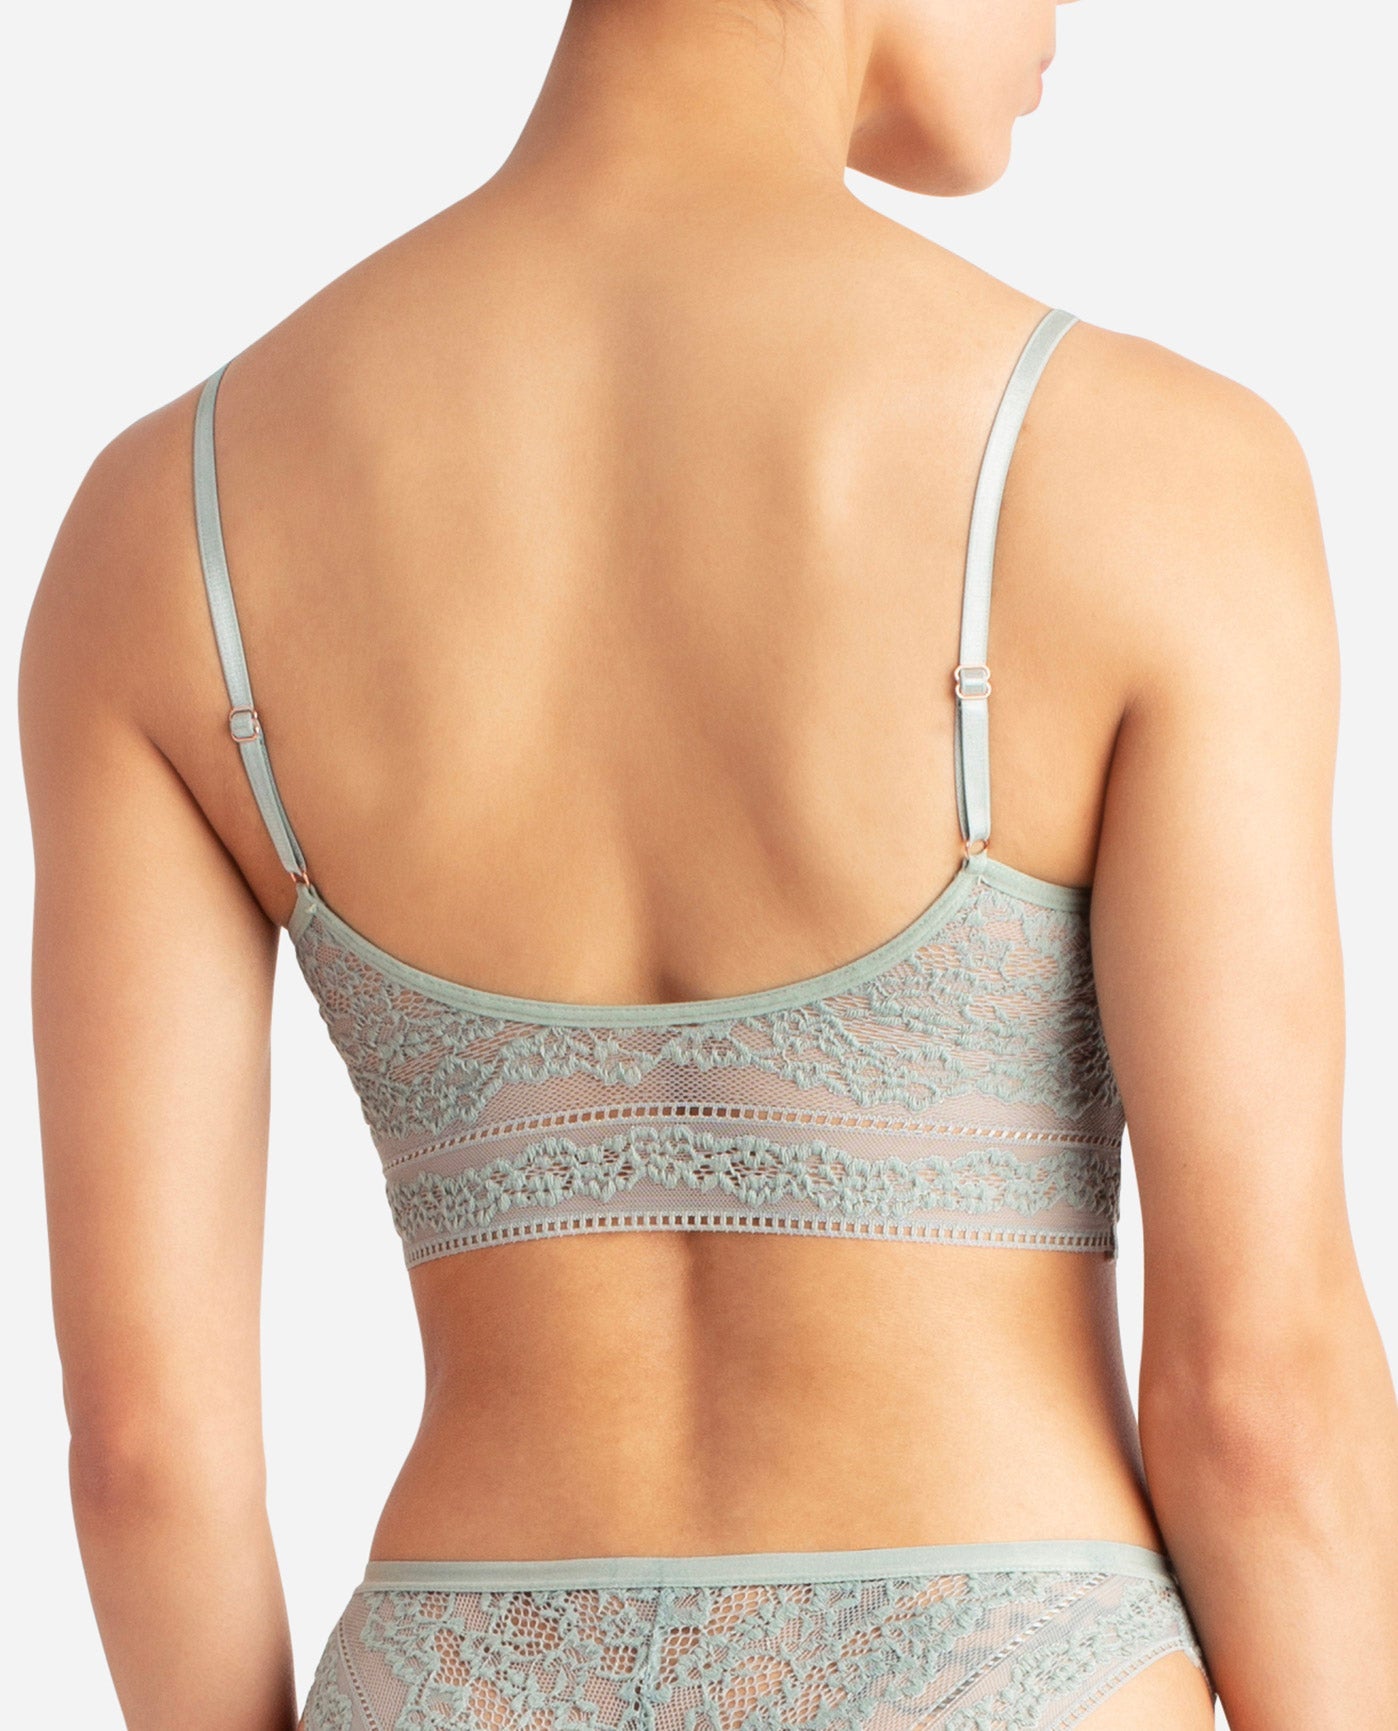 HKD SALES Women and Girls Lace Padded Bralette Breathable Wire